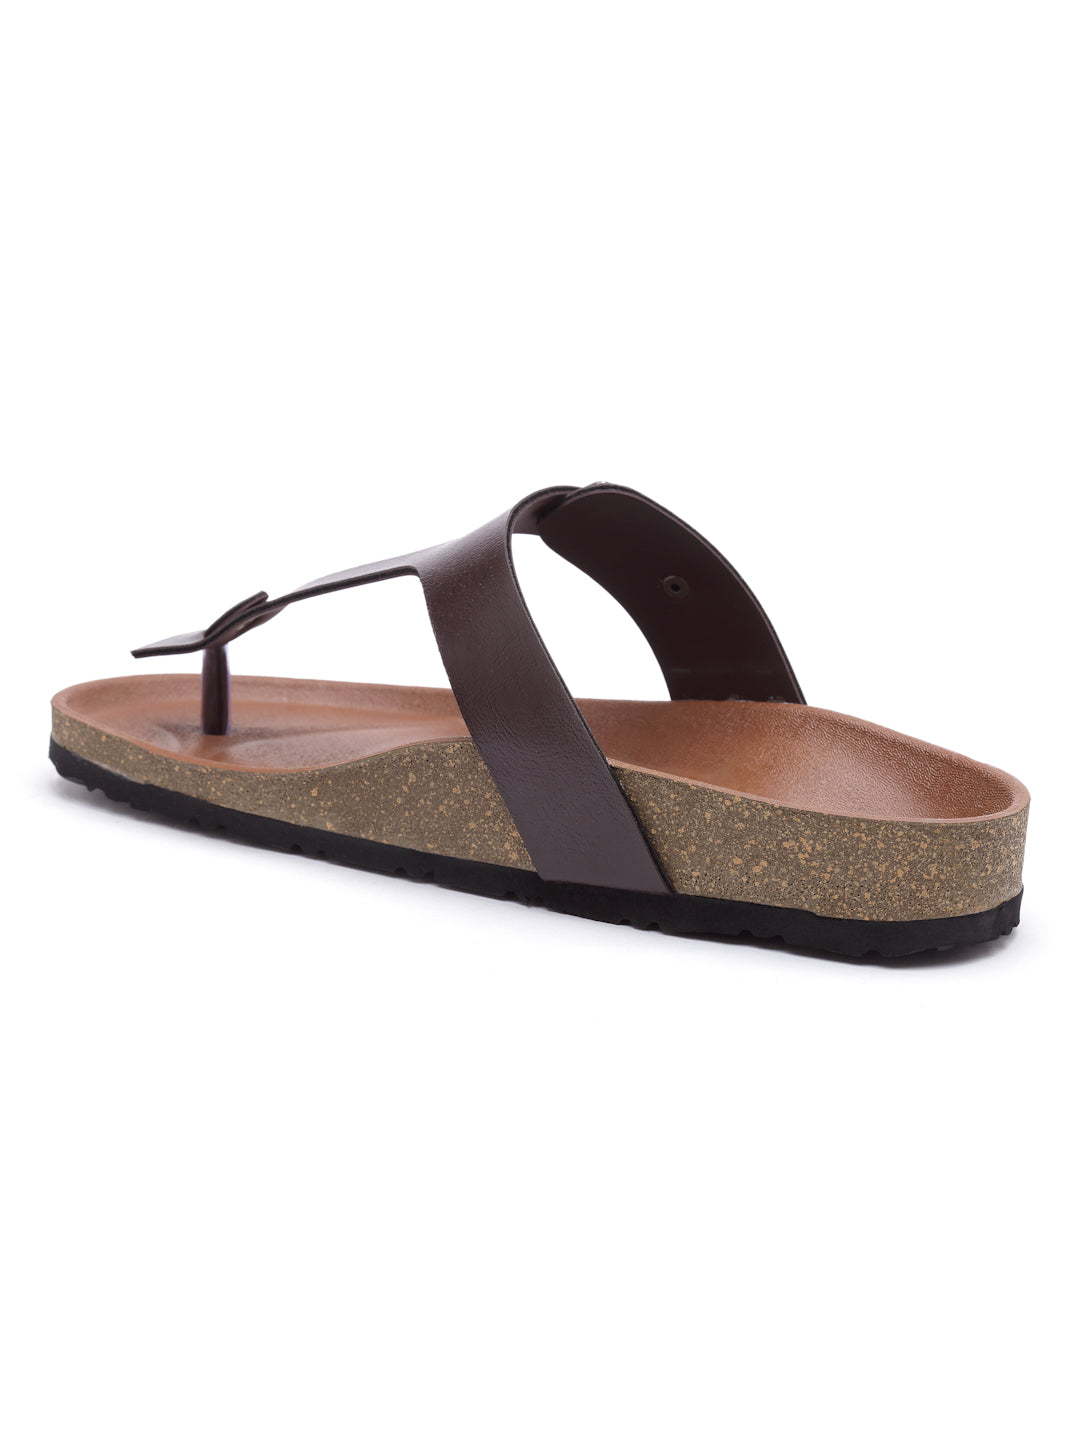 Women's Outdoor Stylish Brown Synthetic Leather Casual Sandal